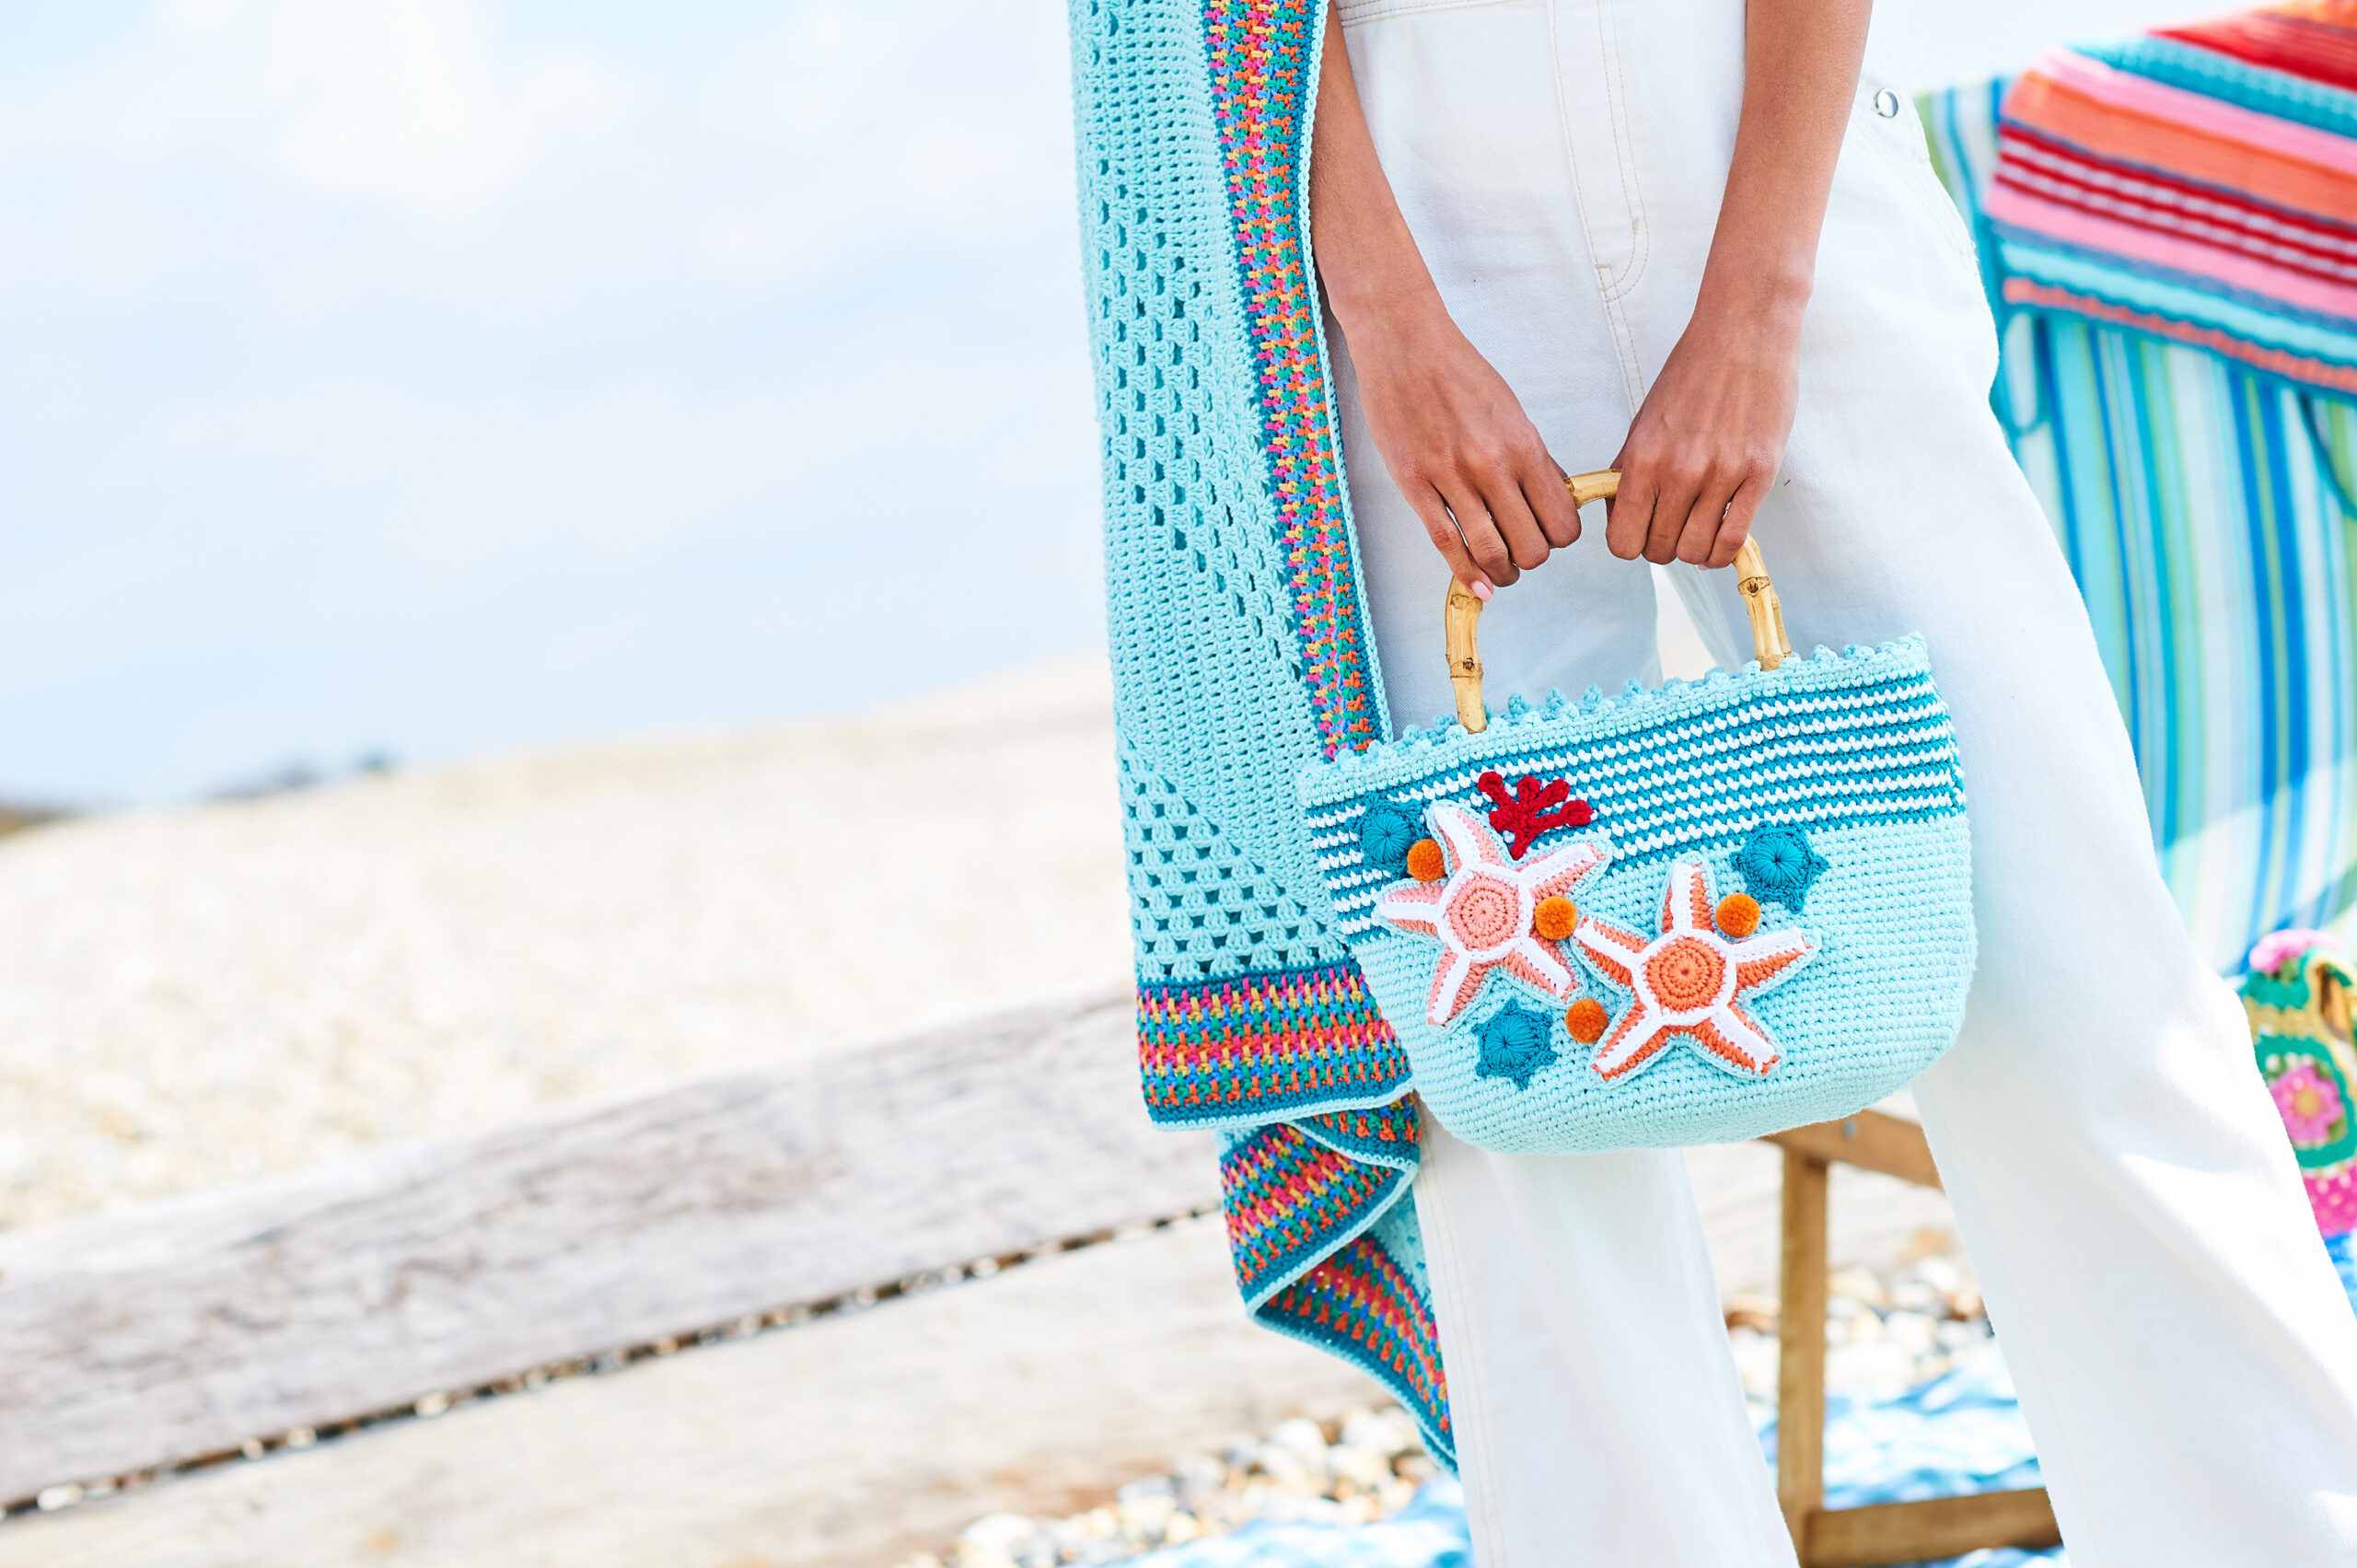 Dive into Summer with the Under the Sea Bag Crochet Pattern